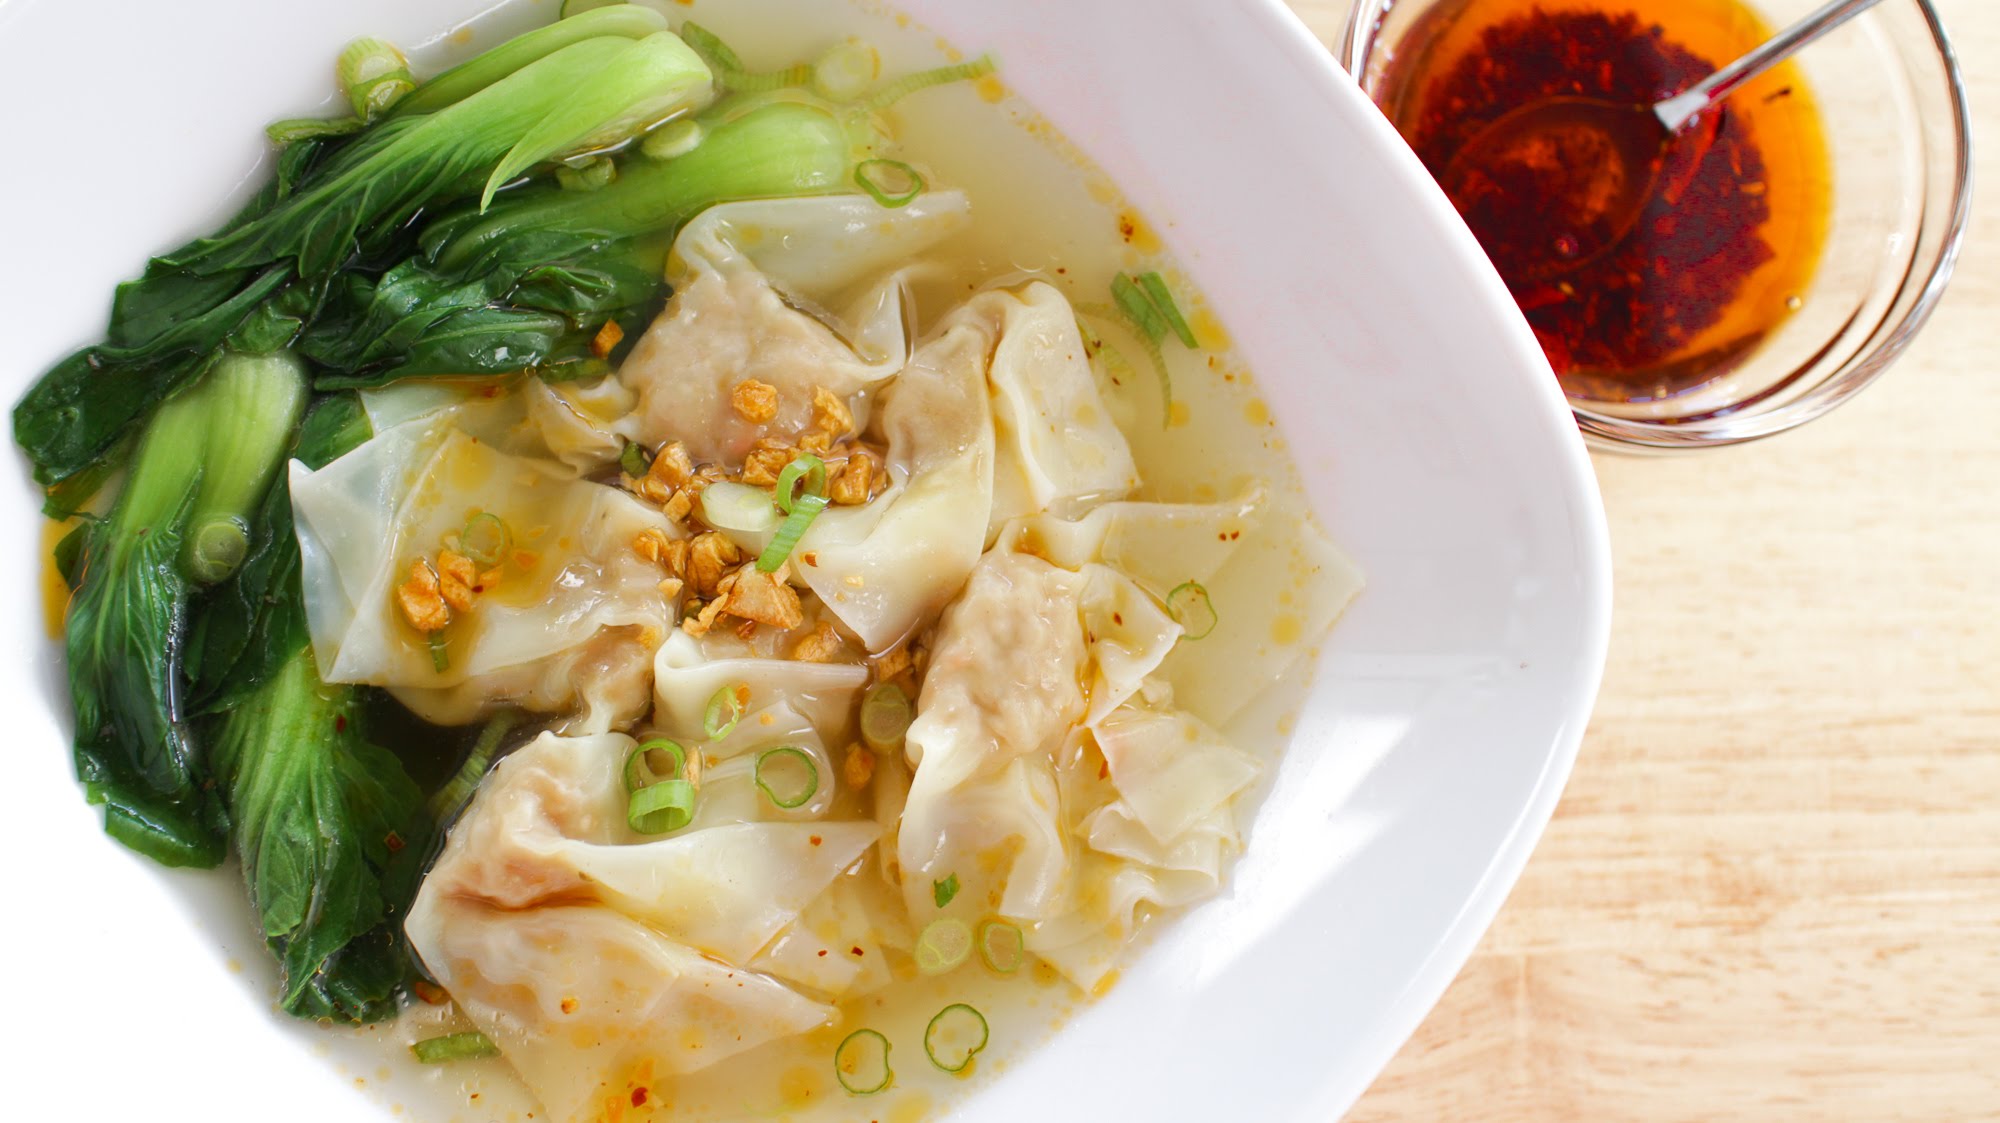 Shrimp Wanton Soup Recipe: Just Perfect for the Weather…